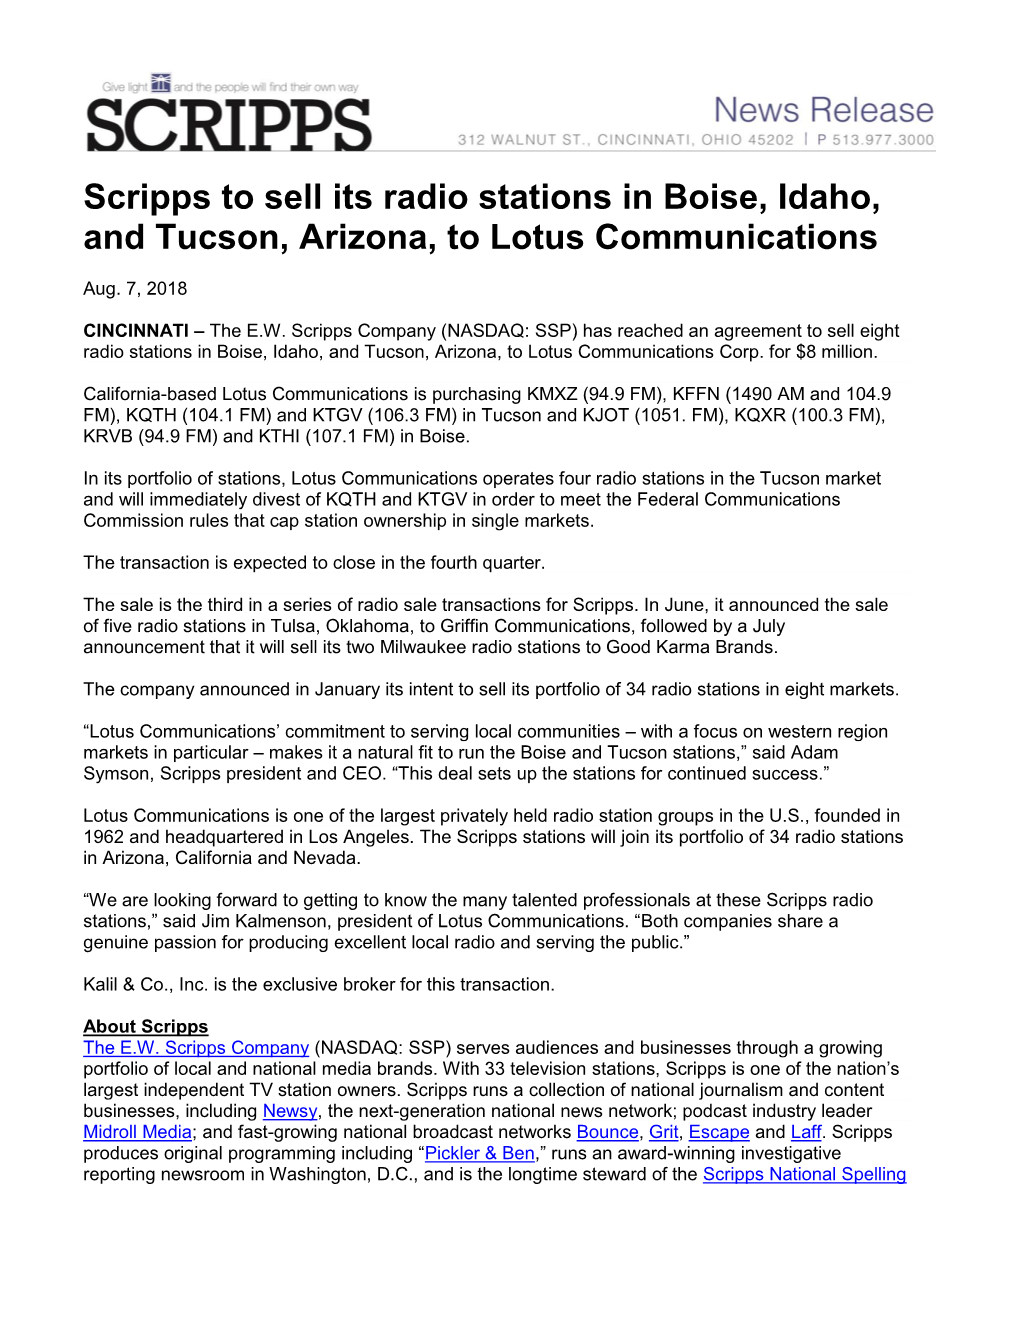 Scripps to Sell Its Radio Stations in Boise, Idaho, and Tucson, Arizona, to Lotus Communications